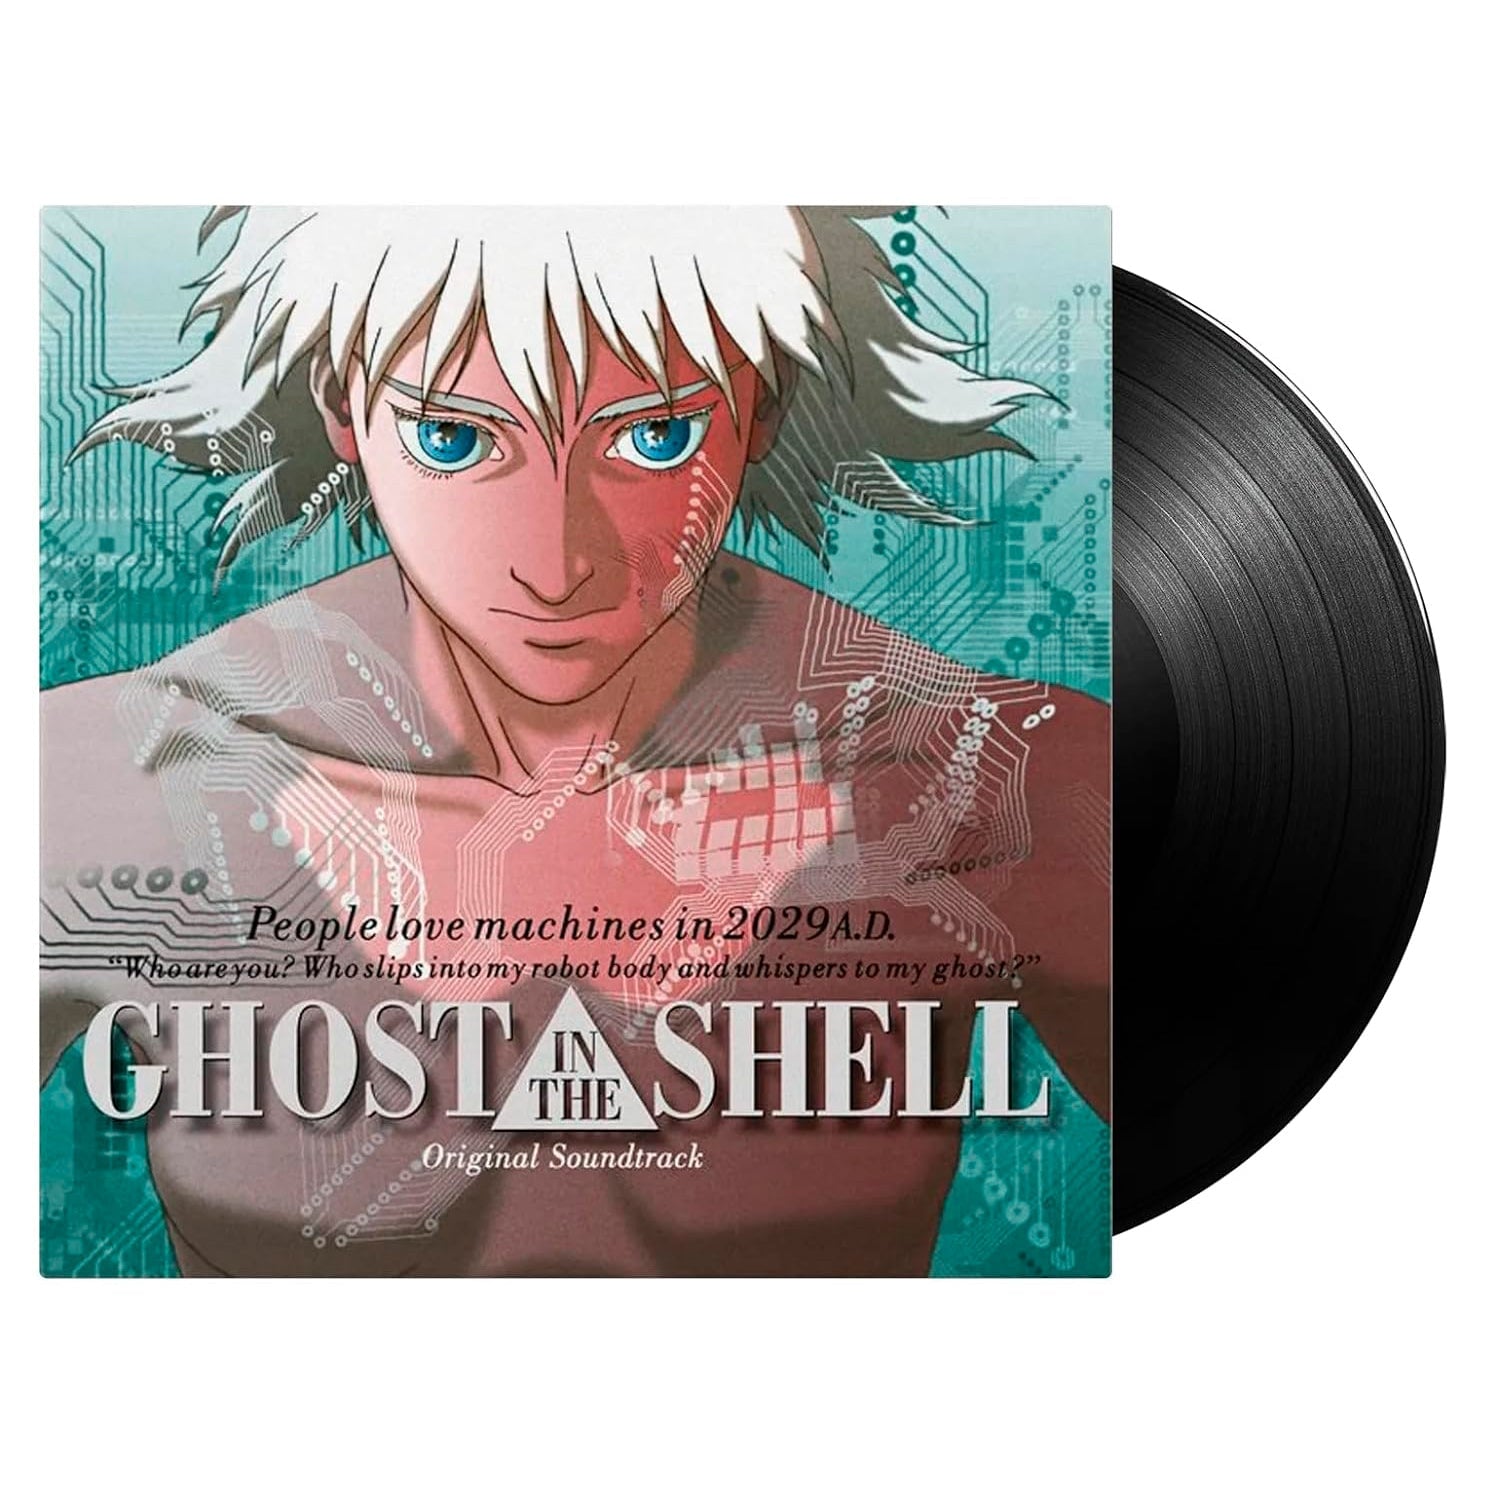 Ghost in the Shell (Original Soundtrack) (Vinyl LP)